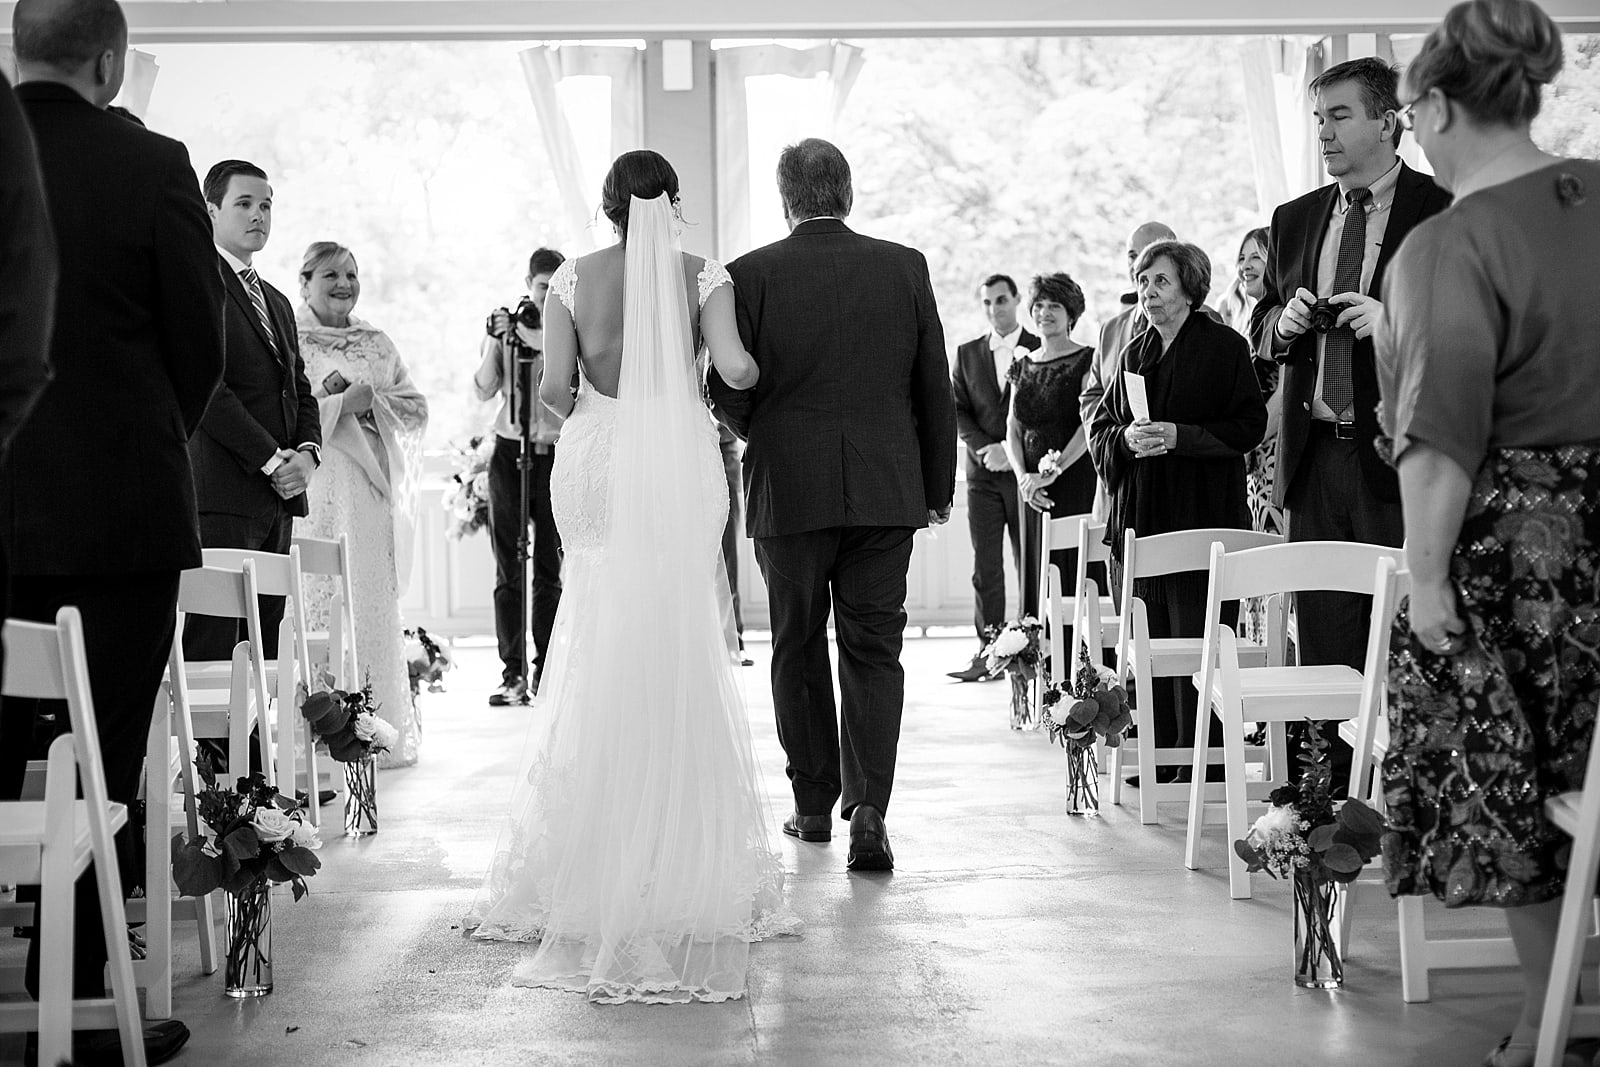 Bride and father of the bride walking down the aisle, wedding ceremony, black and white wedding photography, veil 